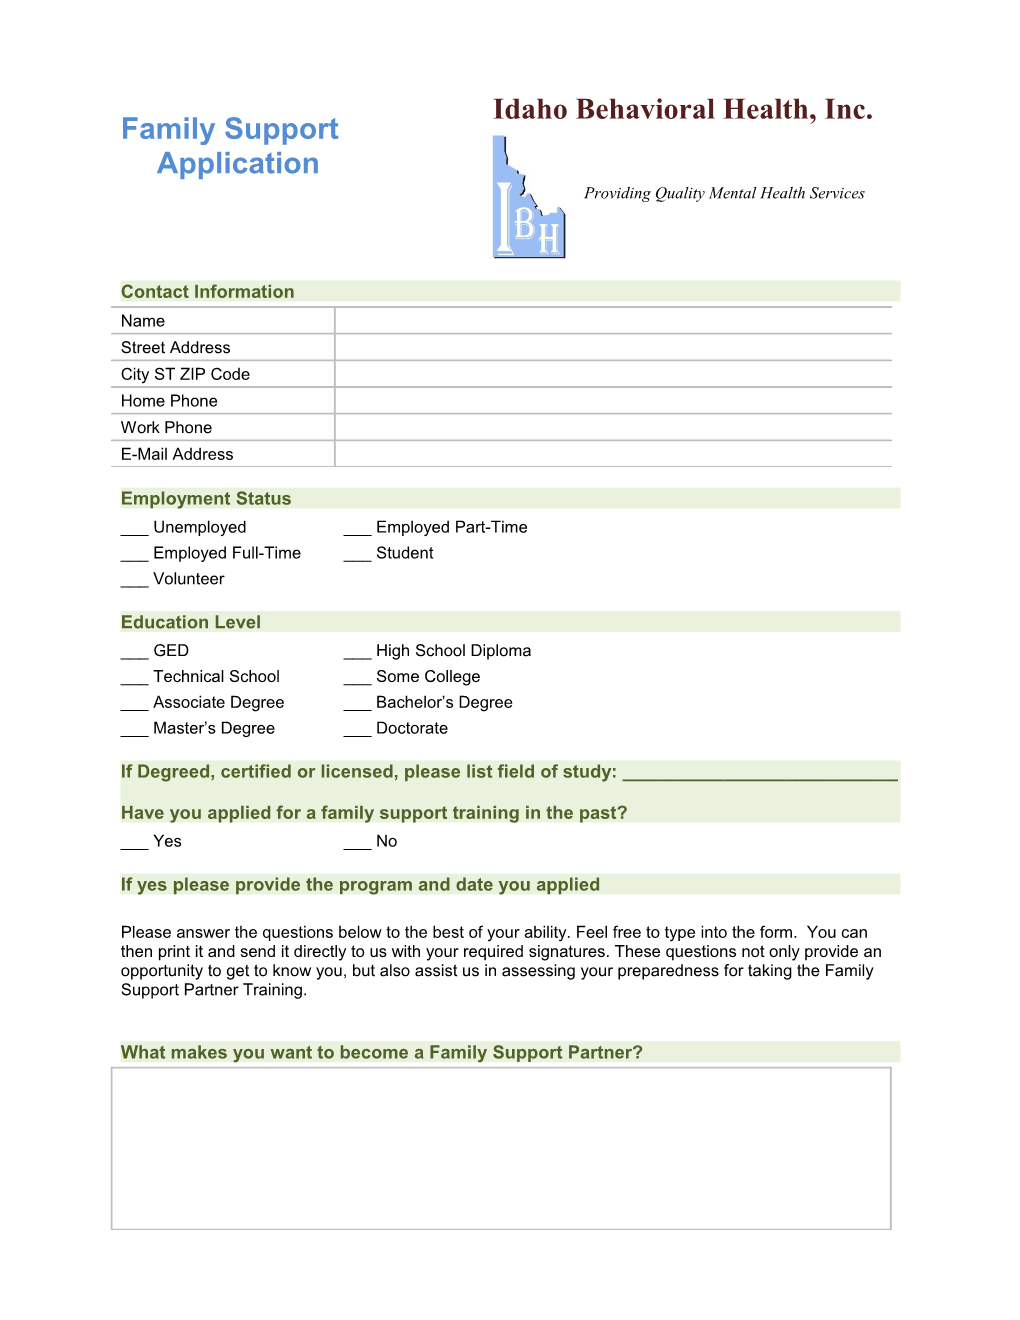 Family Support Application